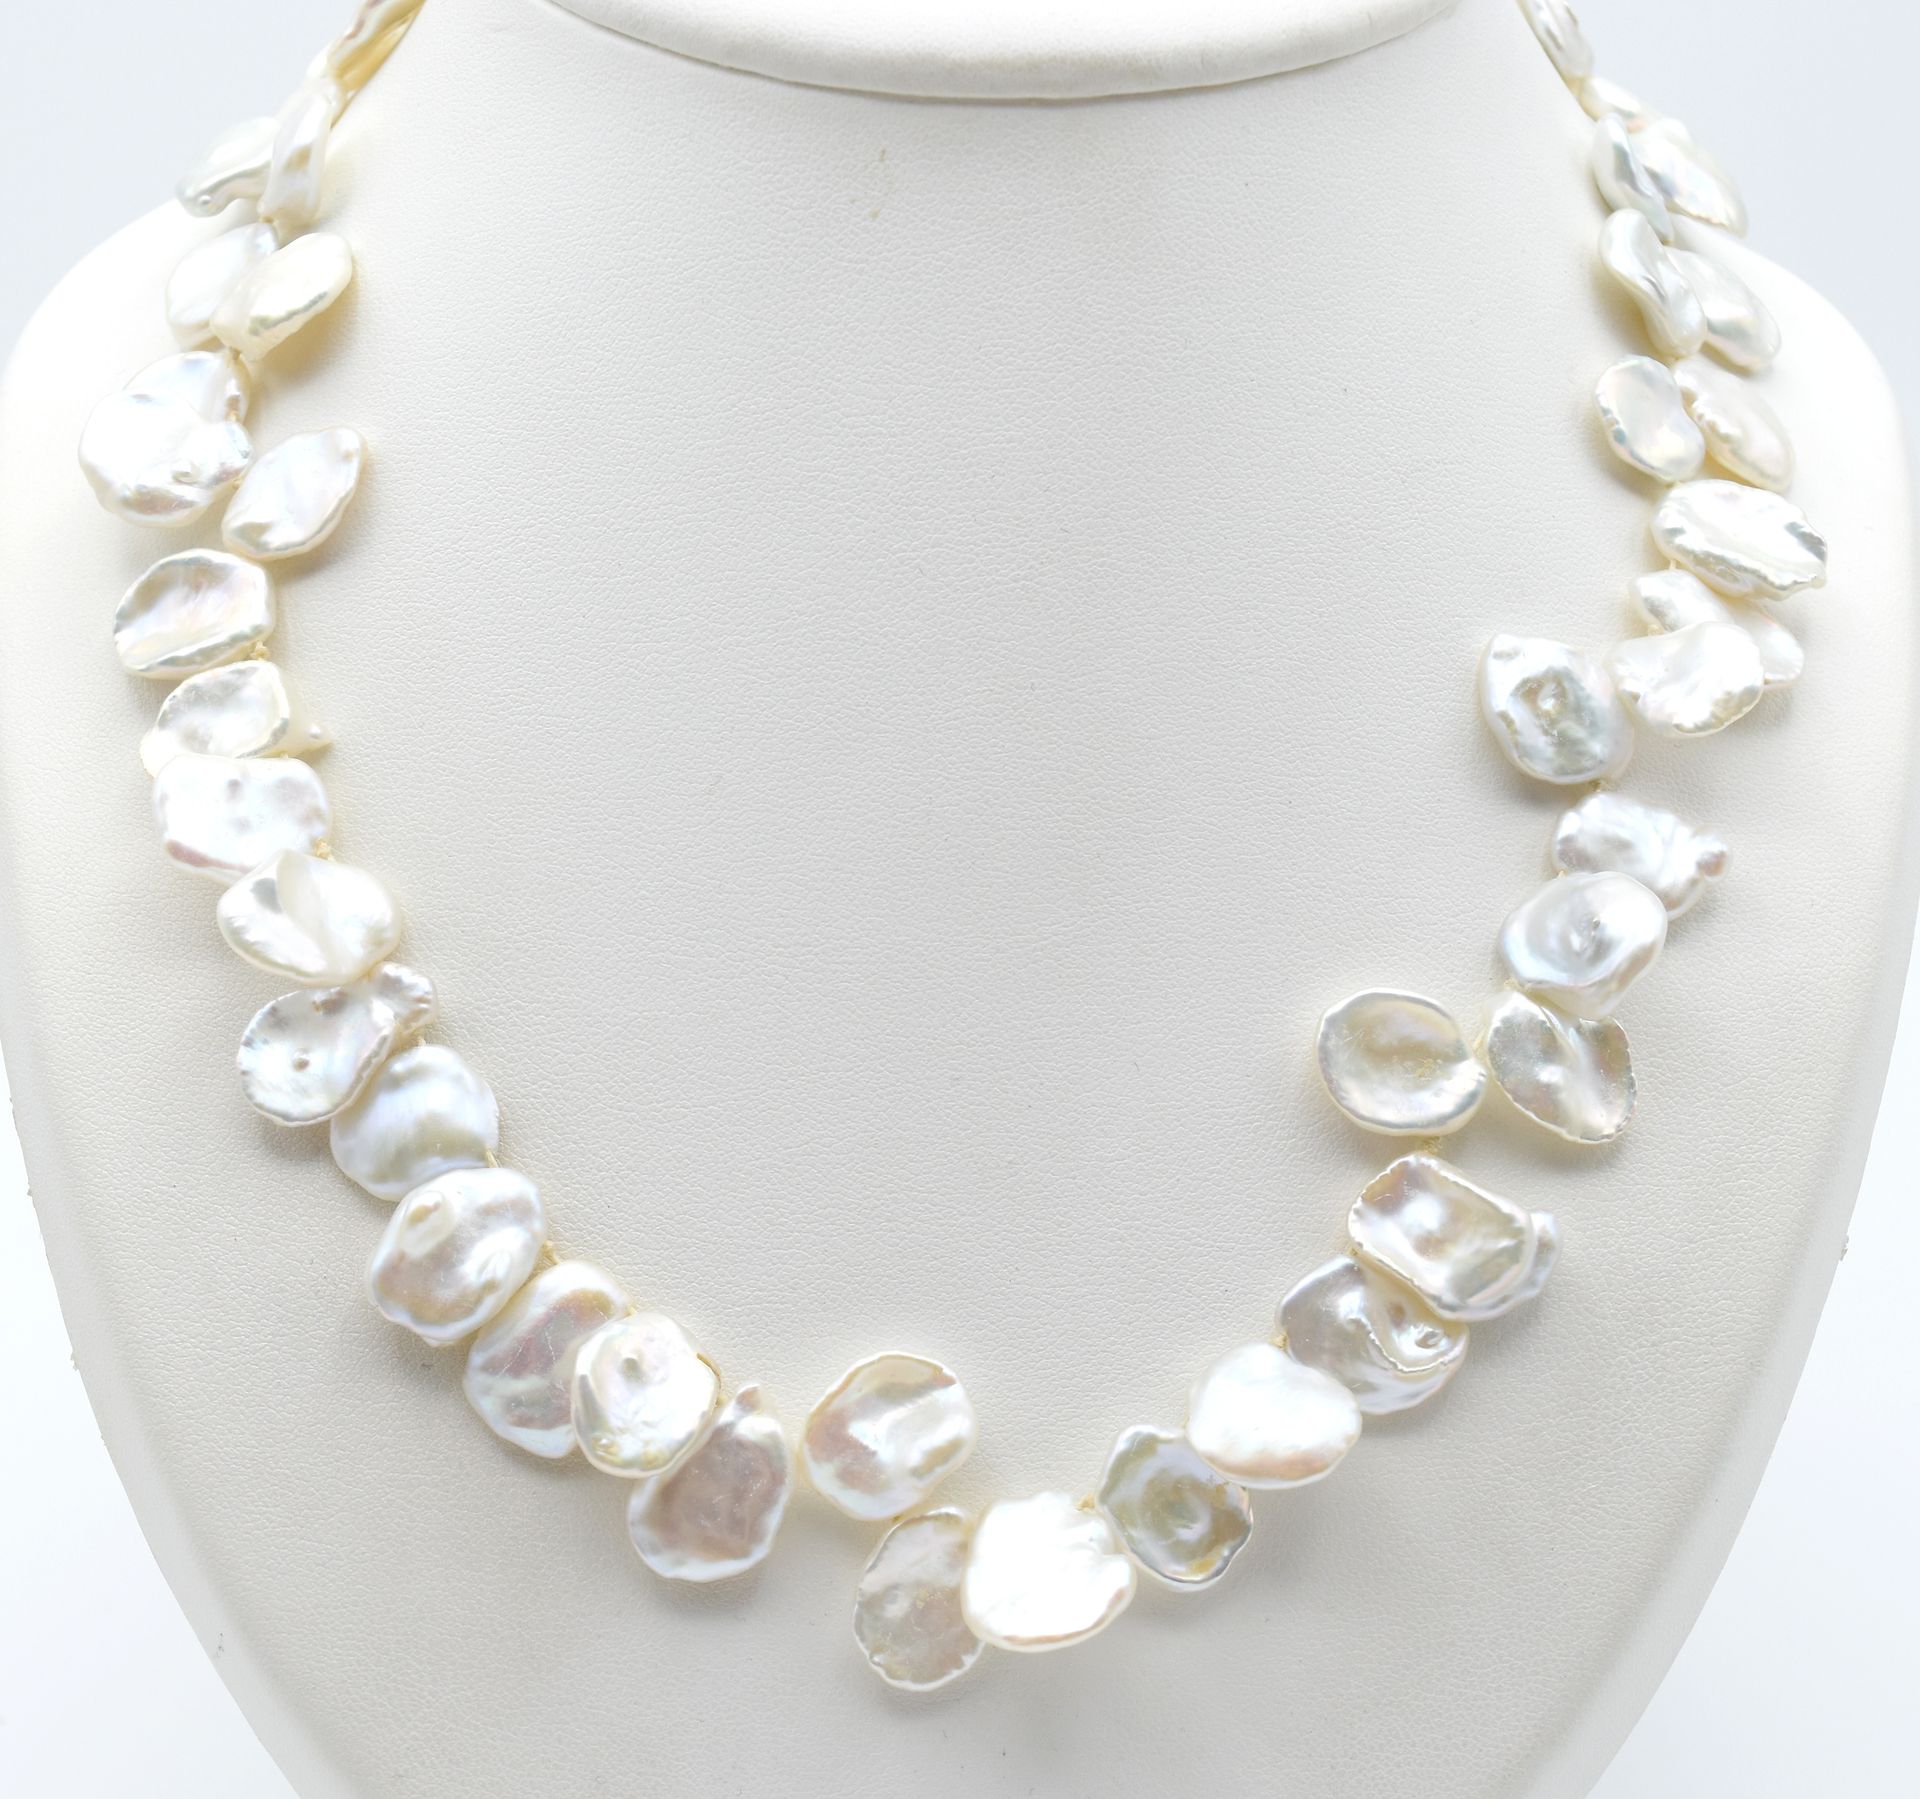 Null Keshi pearl necklace with 18k yellow and white gold clasp (49 cm) 

NL:

 H&hellip;